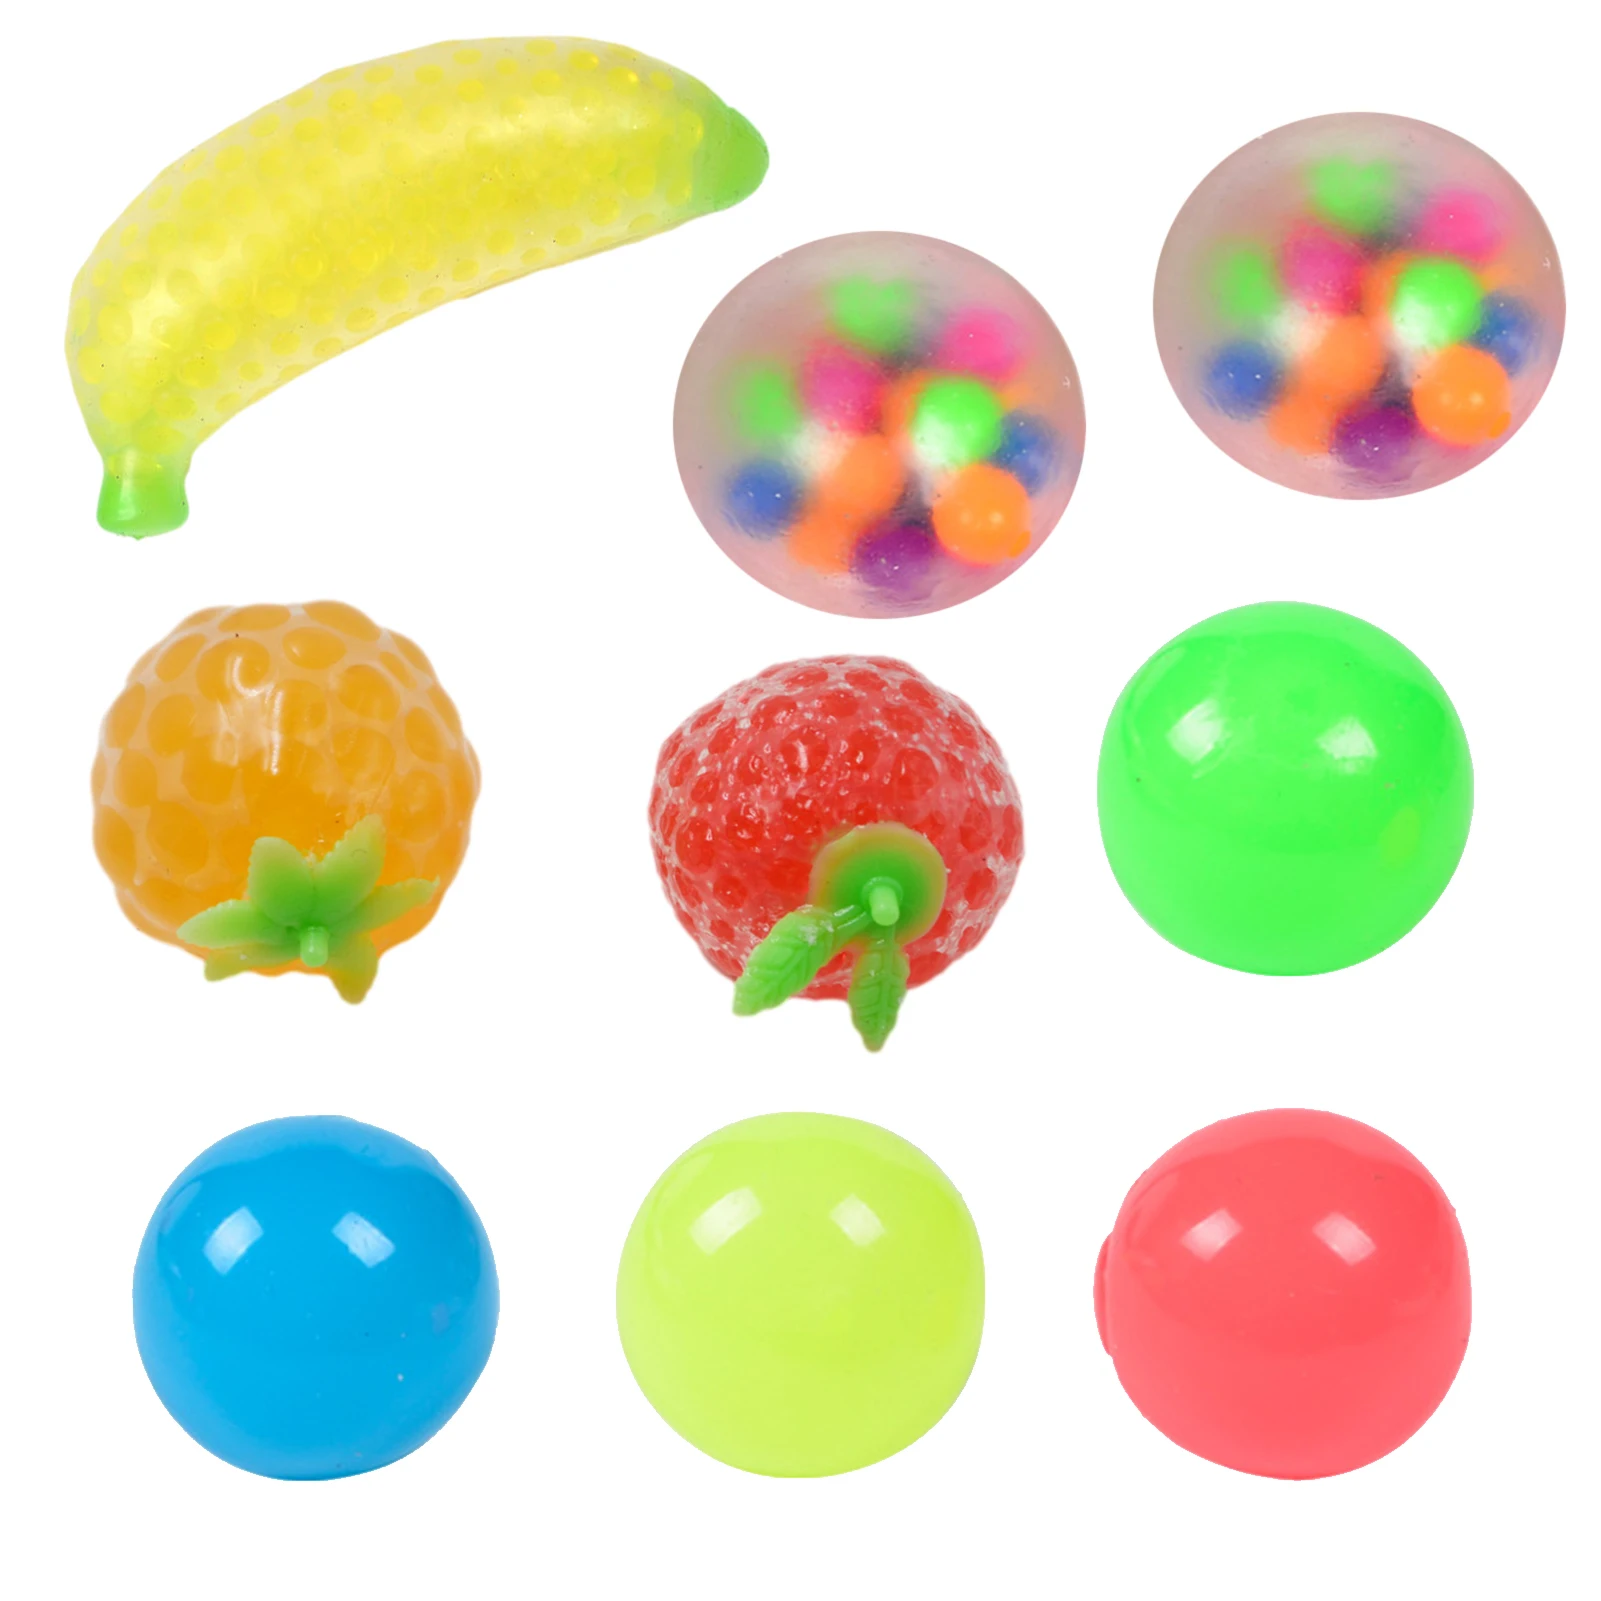 9pcs Fun Soft Fruit Anti Stress Ball Stress Reliever Toy For Kids Adult Anxiety Stress Relief Fidget Decompression Sensory Toy